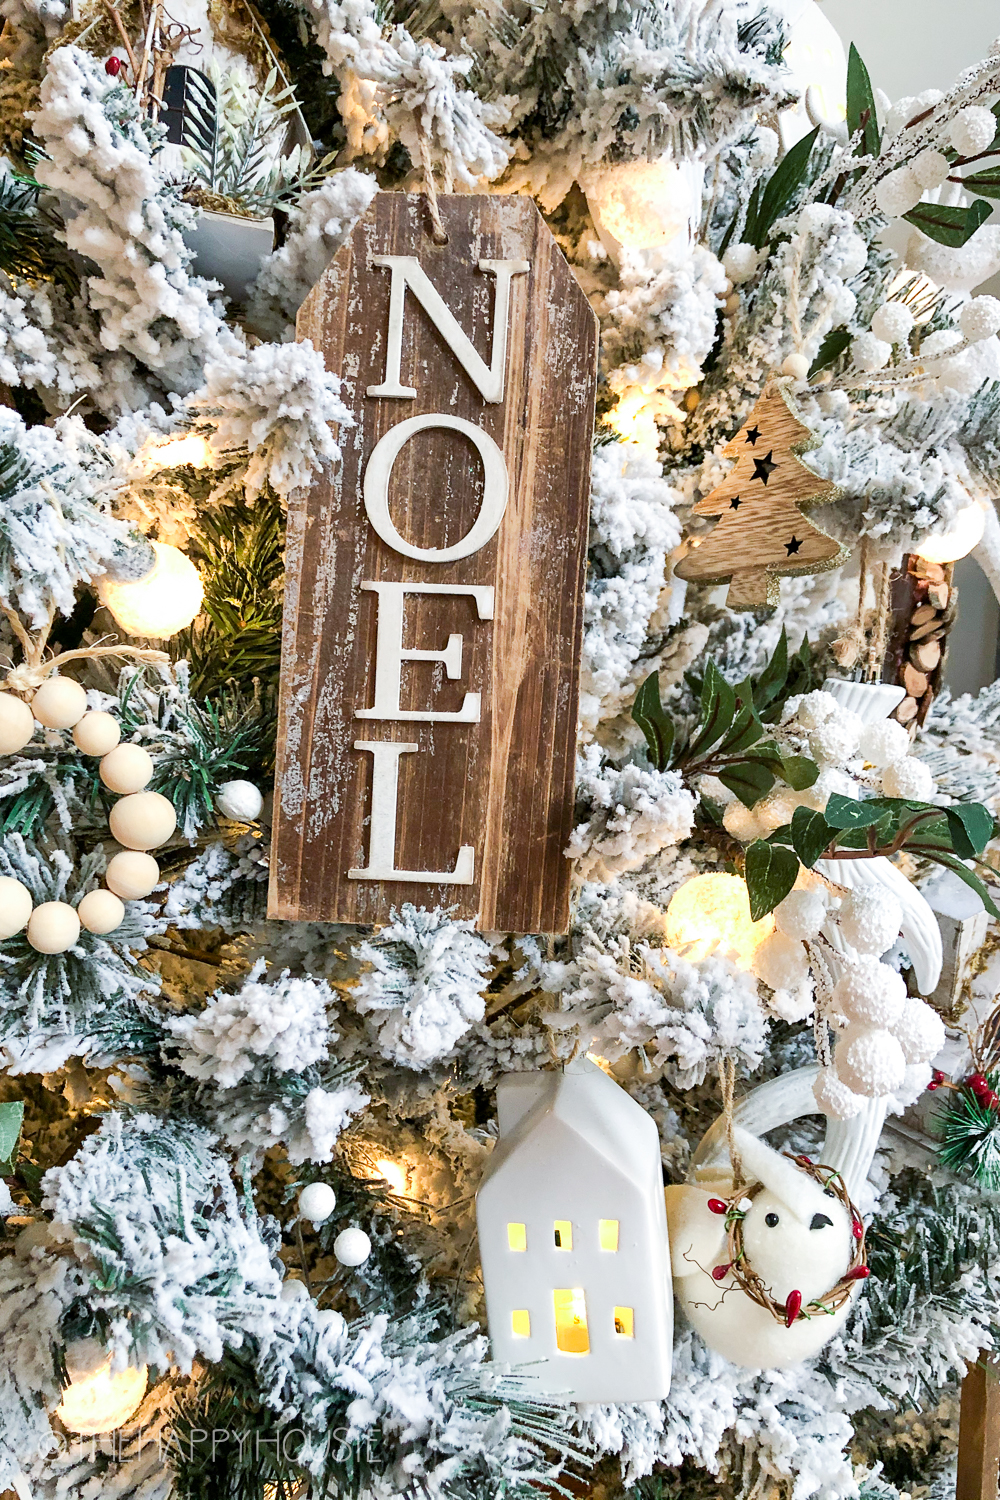 Up close picture of the NOEL wooden sign on the tree.